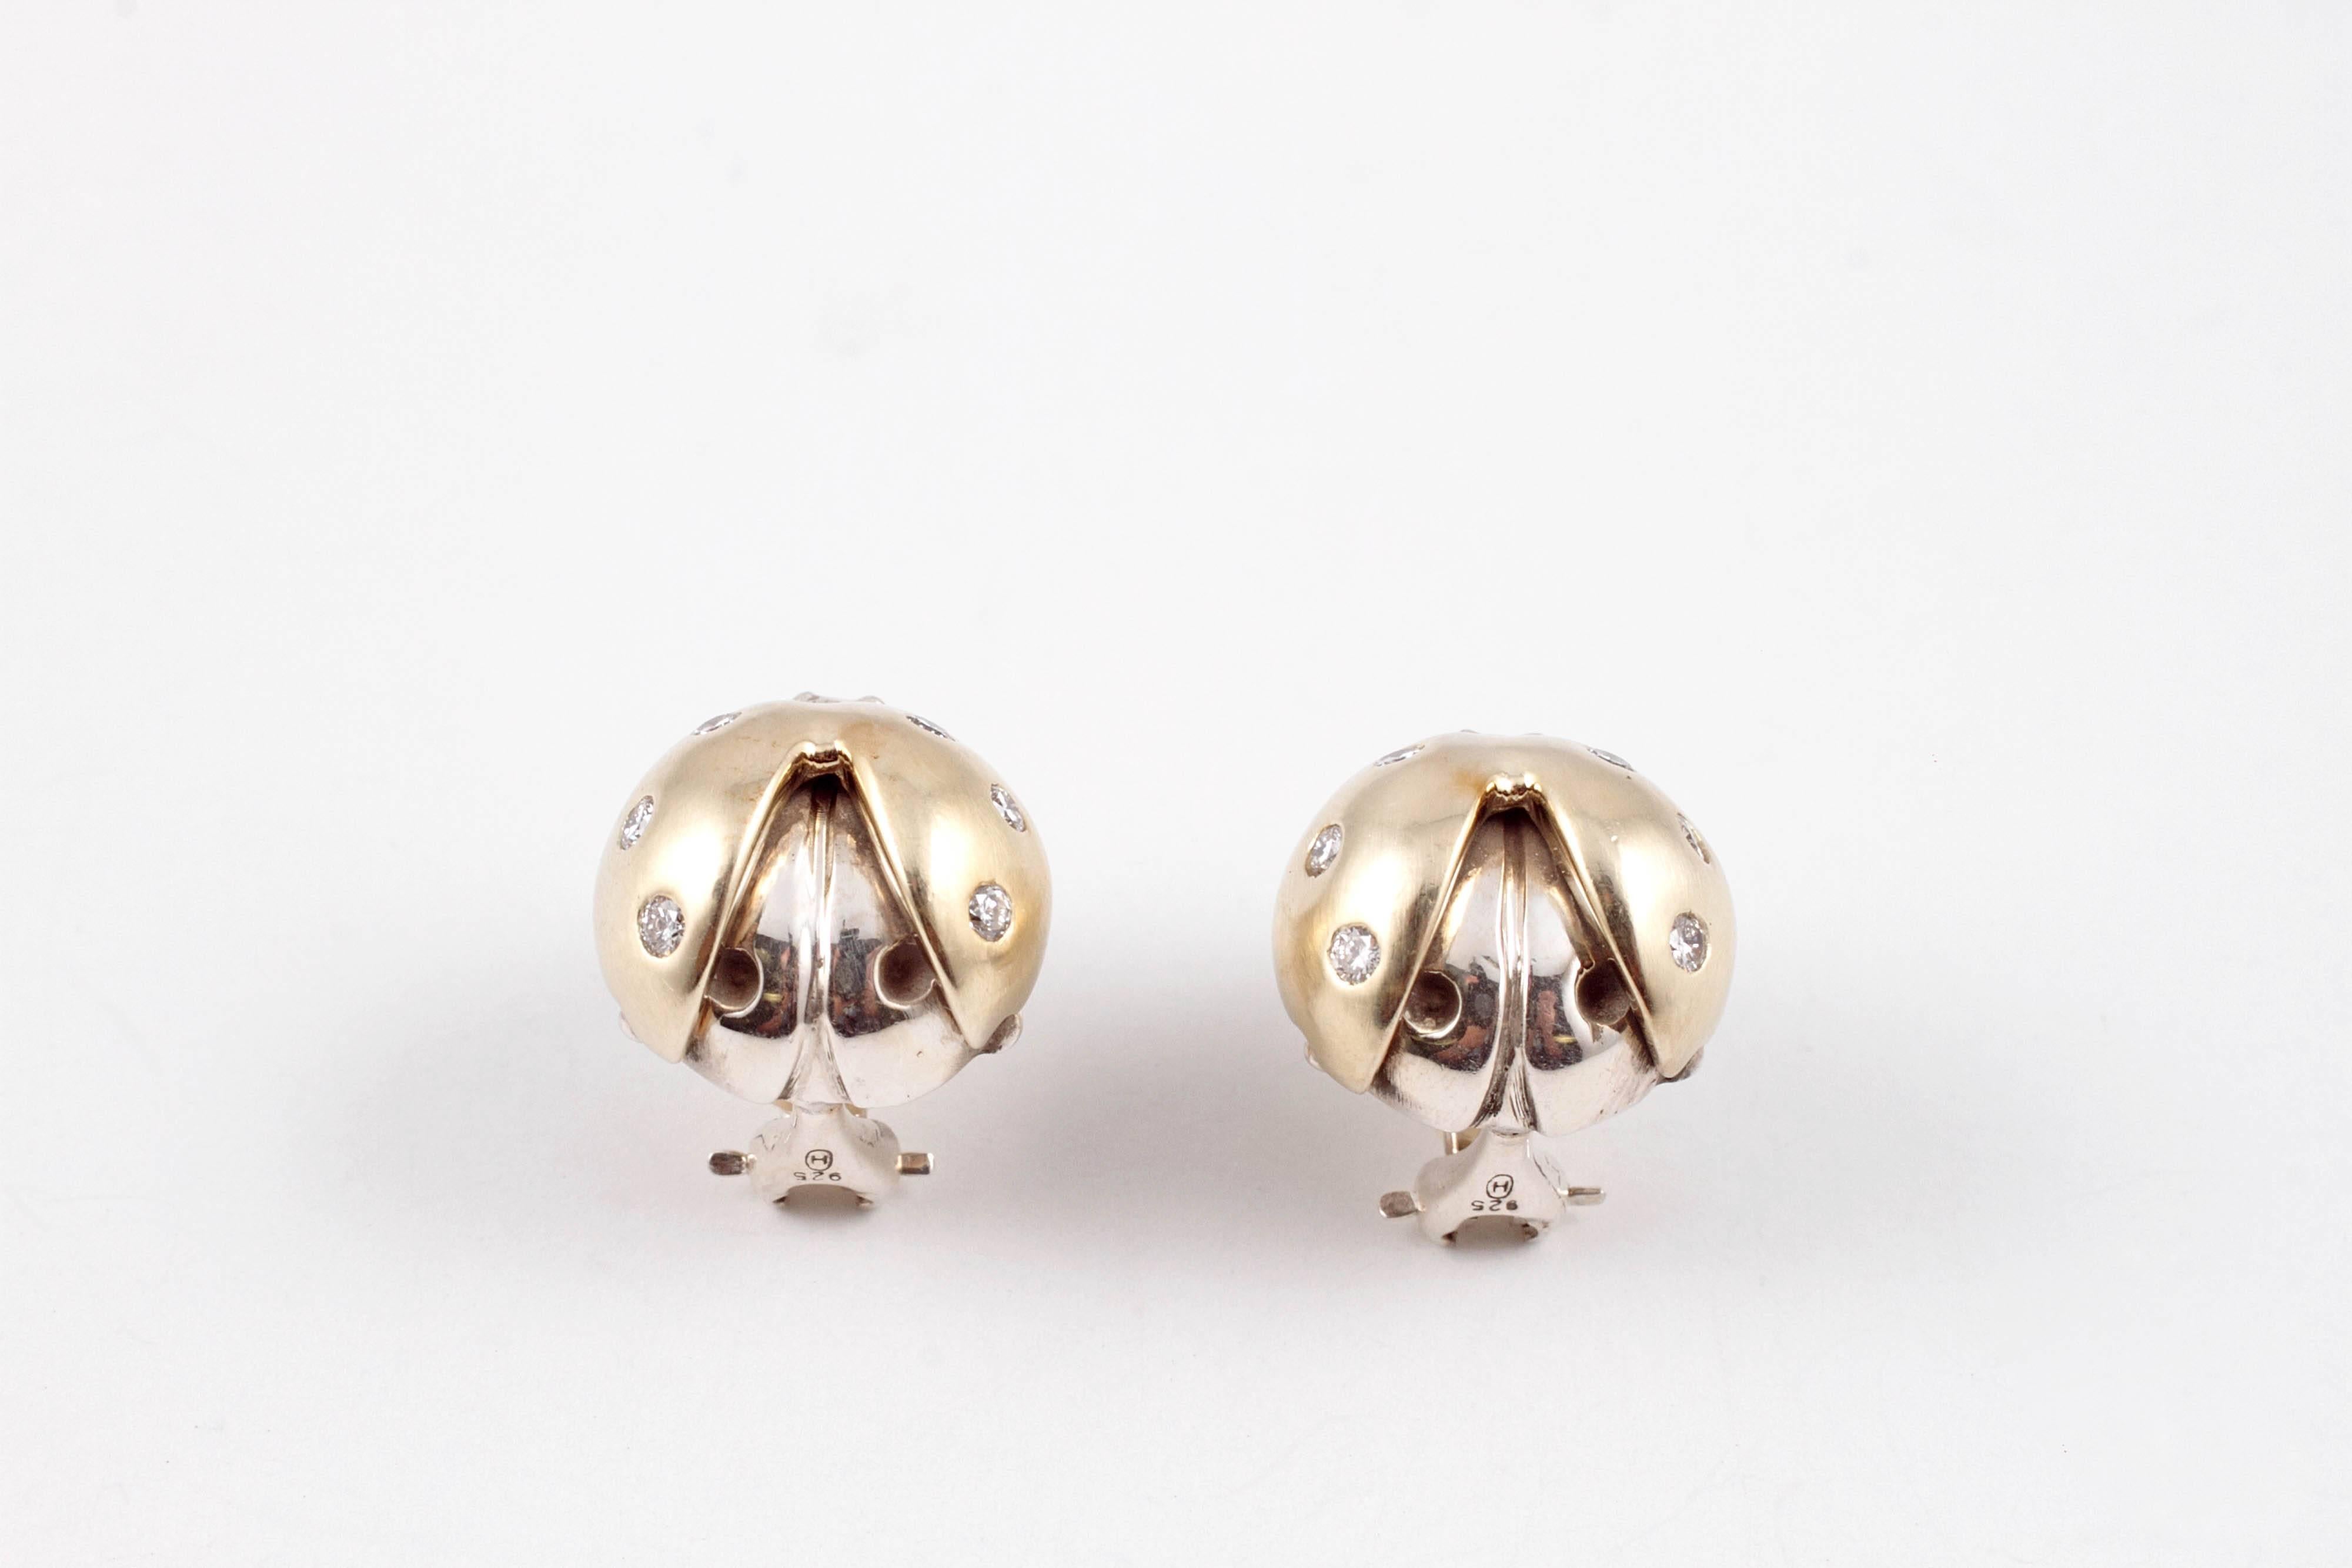 For the collector or the person who likes something a little out of the ordinary!  These darling ladybug earrings are composed of 18 karat yellow gold and sterling silver and are by Sarah Jane for Saint.